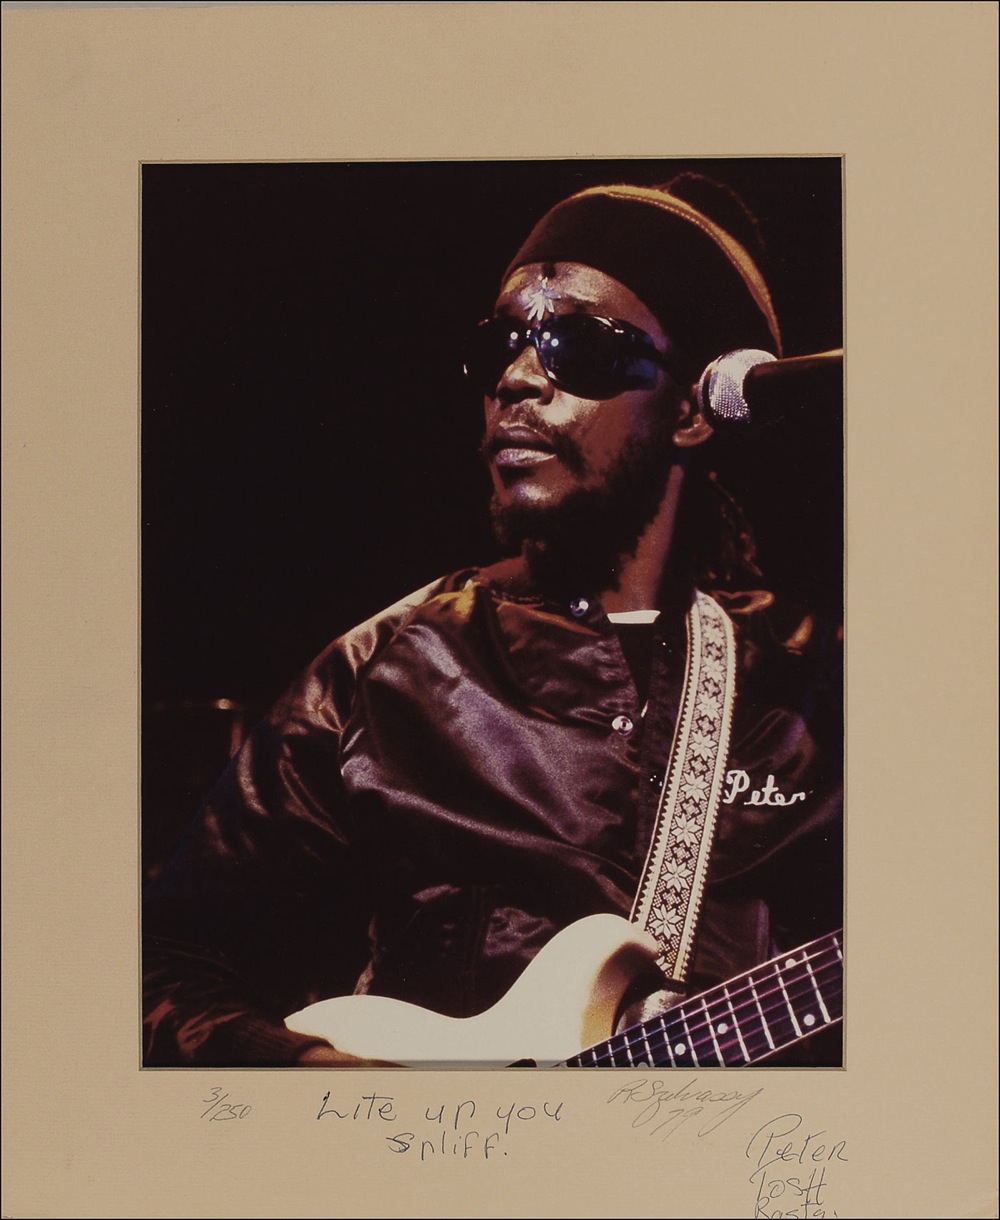 Lot #934 Peter Tosh